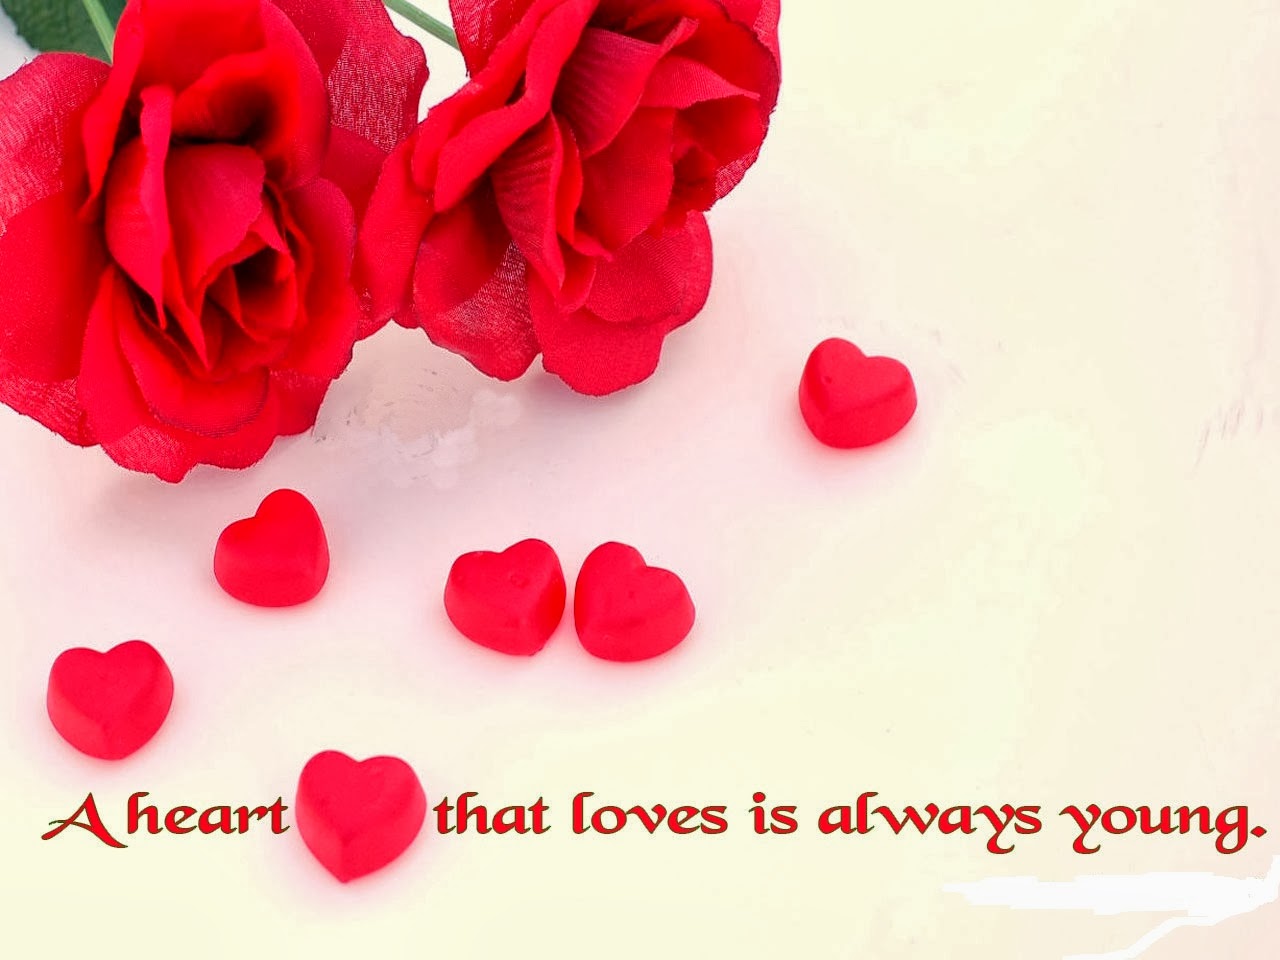 Love Quotes Sayings and Phrases in Images Free Download 